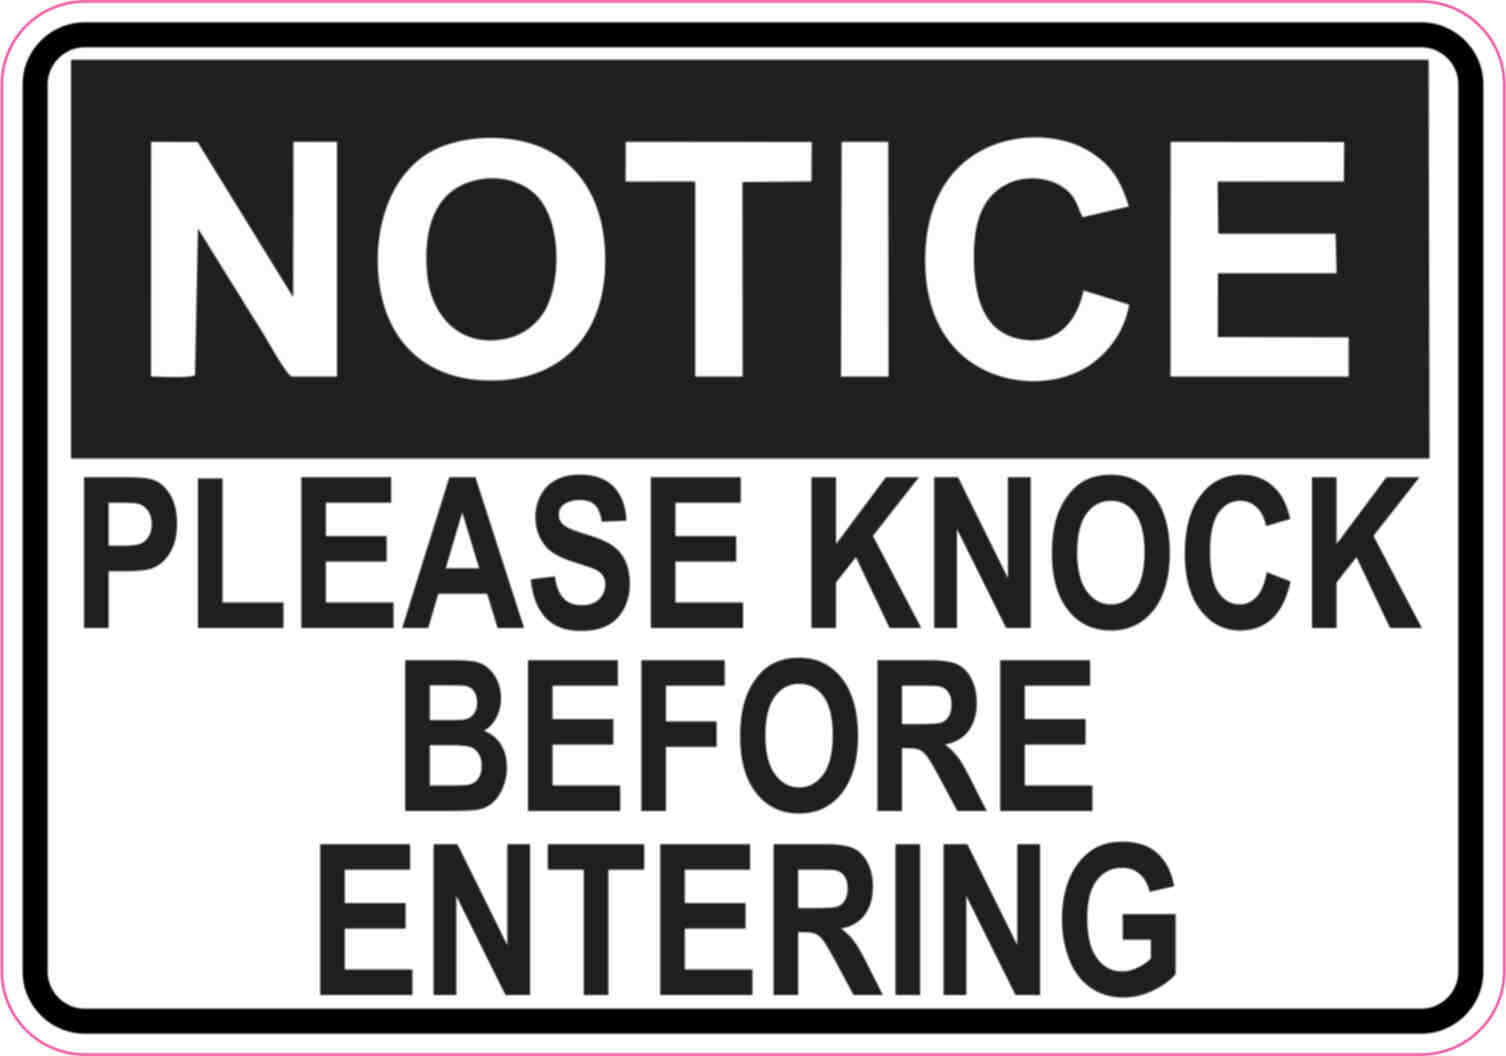 5 x 3.5 Notice Please Knock Before Entering Magnet Magnetic Signs Magnets Sign